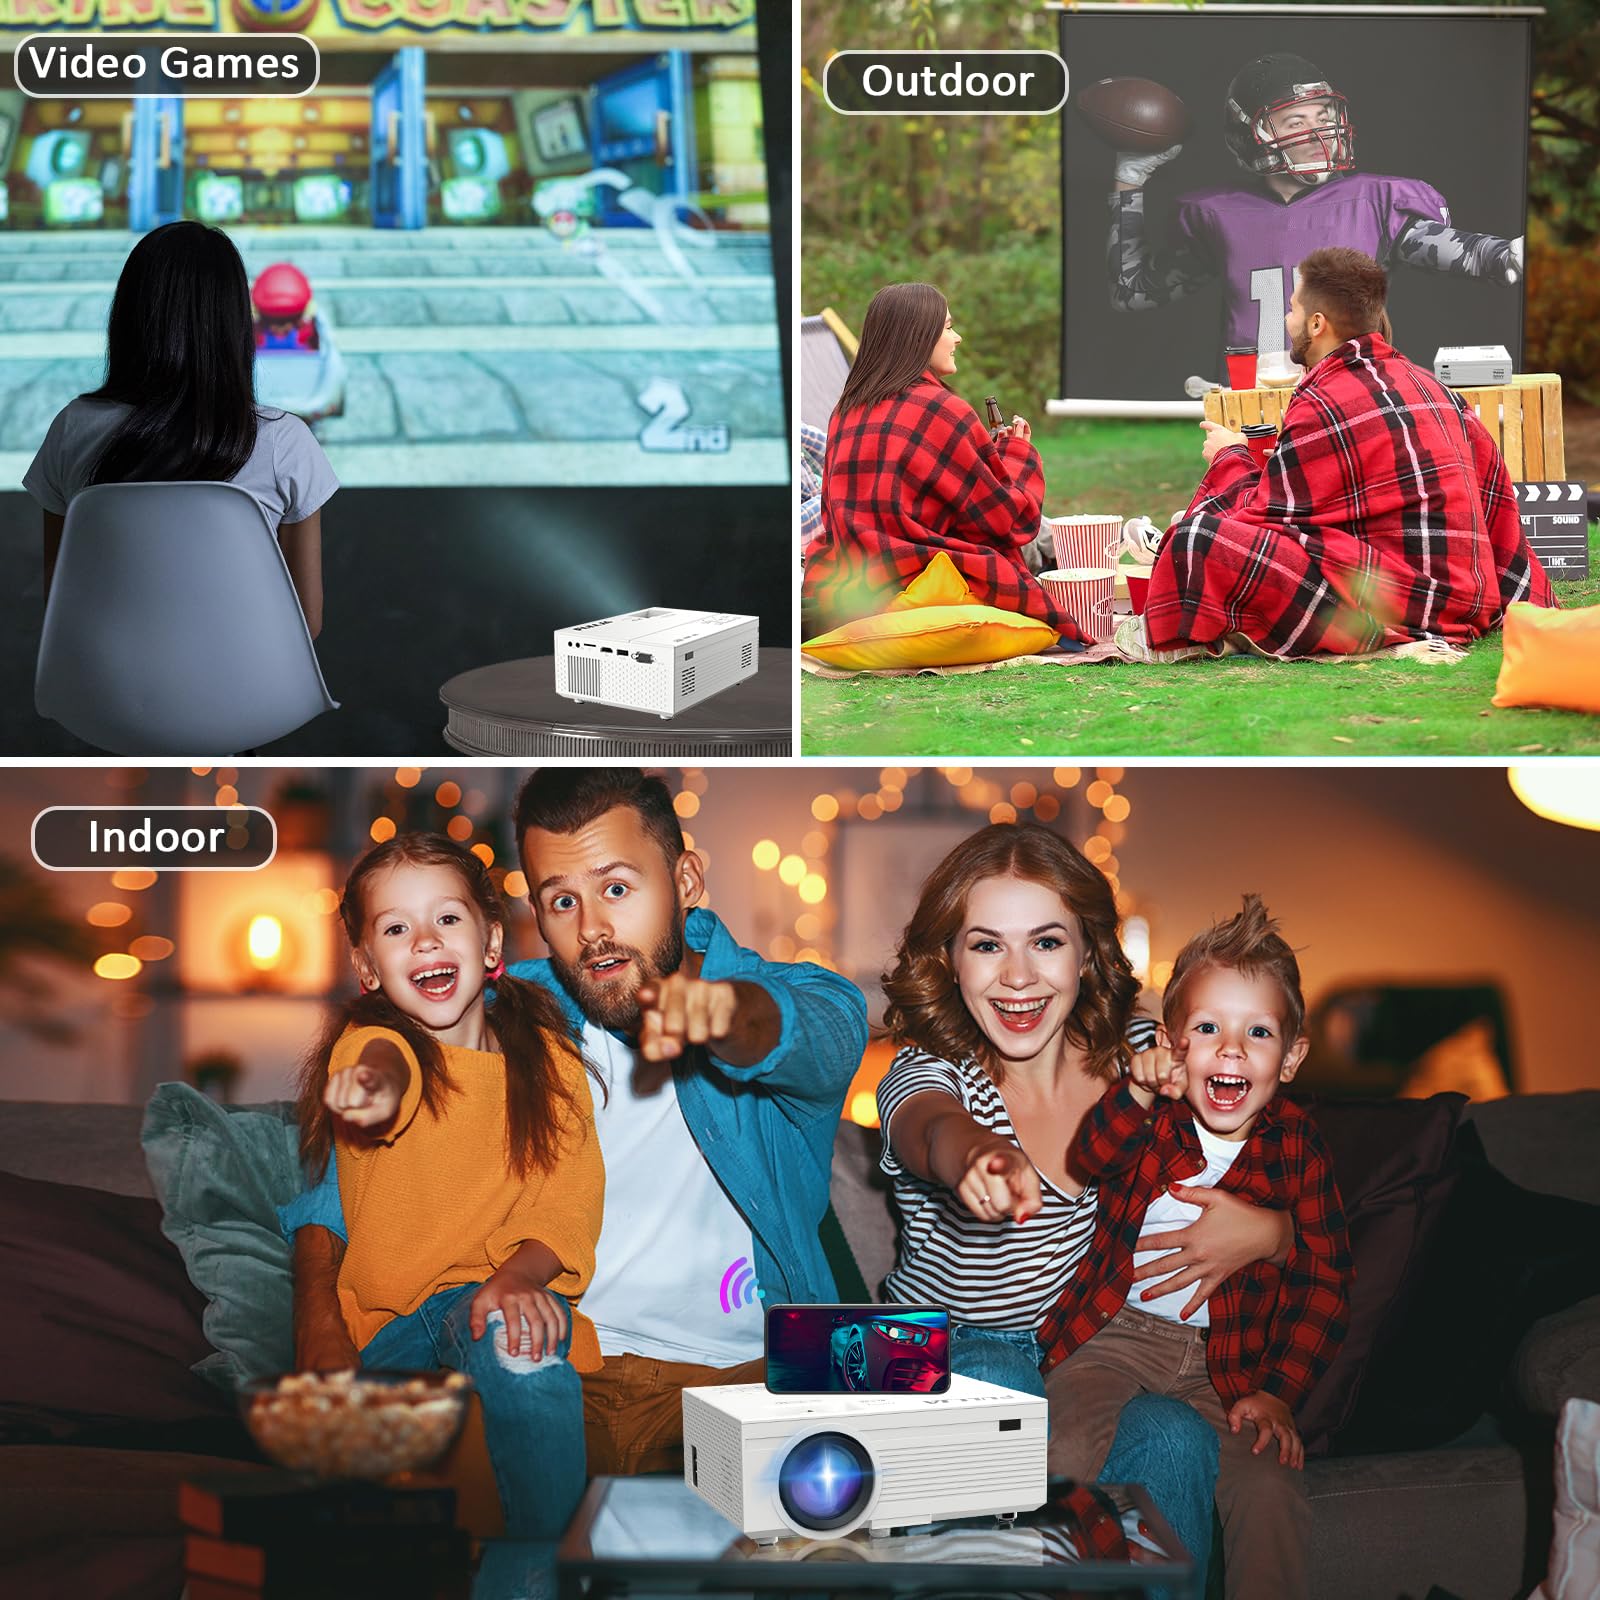 WiFi and Bluetooth Mini Projector - Video Projection Screen for Home Theater Movie Projector, HD 1080P Portable Home Theater Movie Projector Compatible with HDMI, TV Stick, PS4, USB, AV, PC, Phone